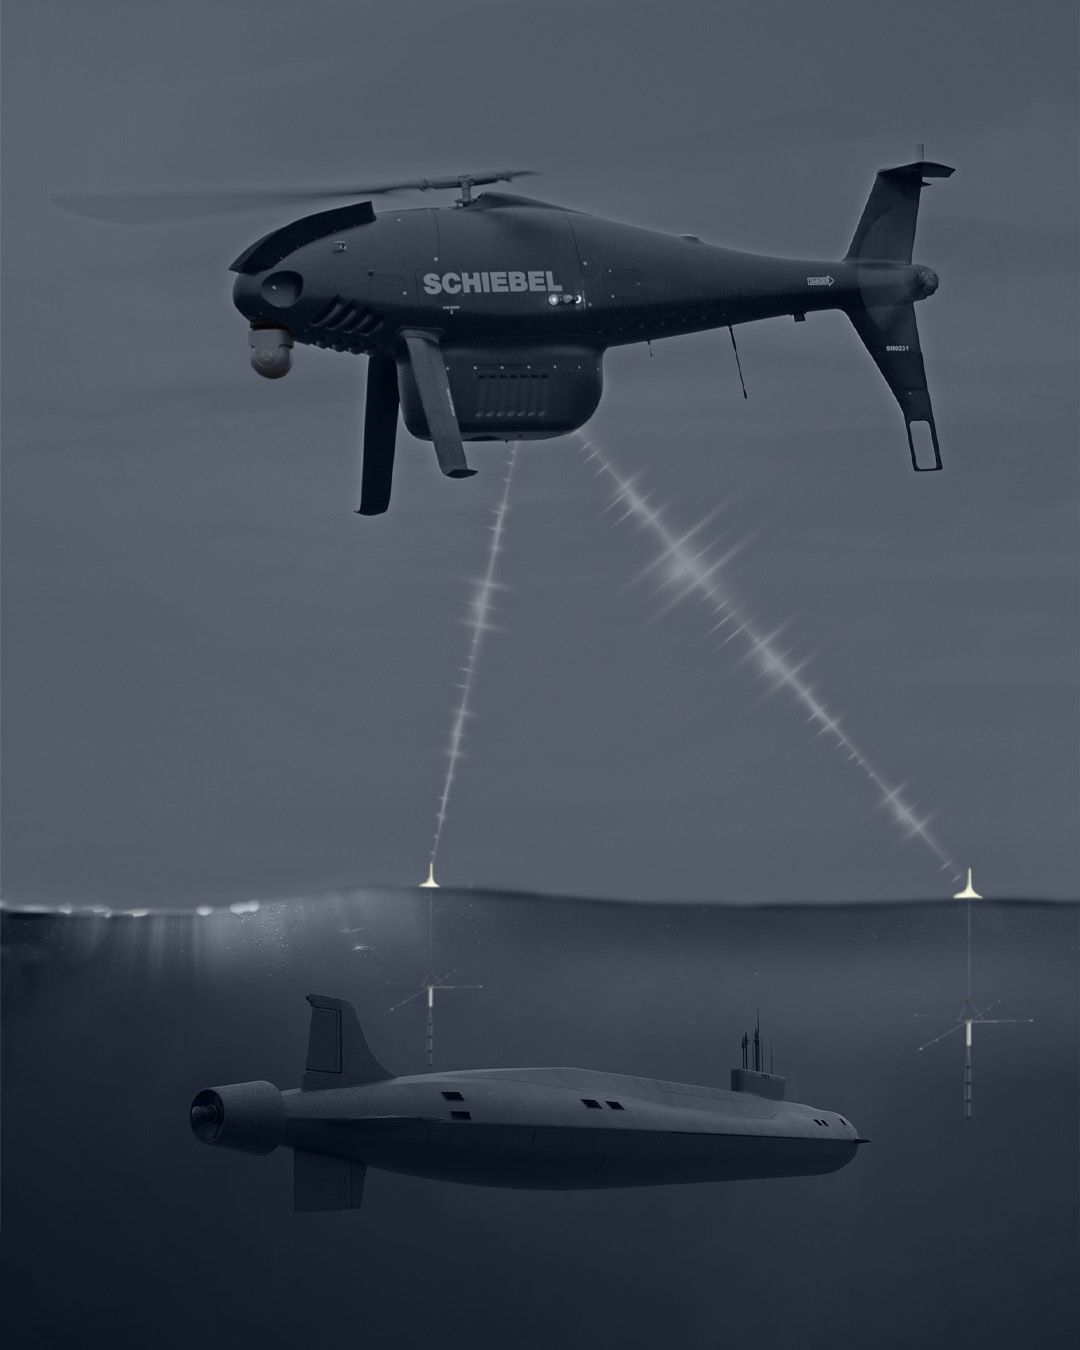 Camcopter S-100 to Detect Submarines